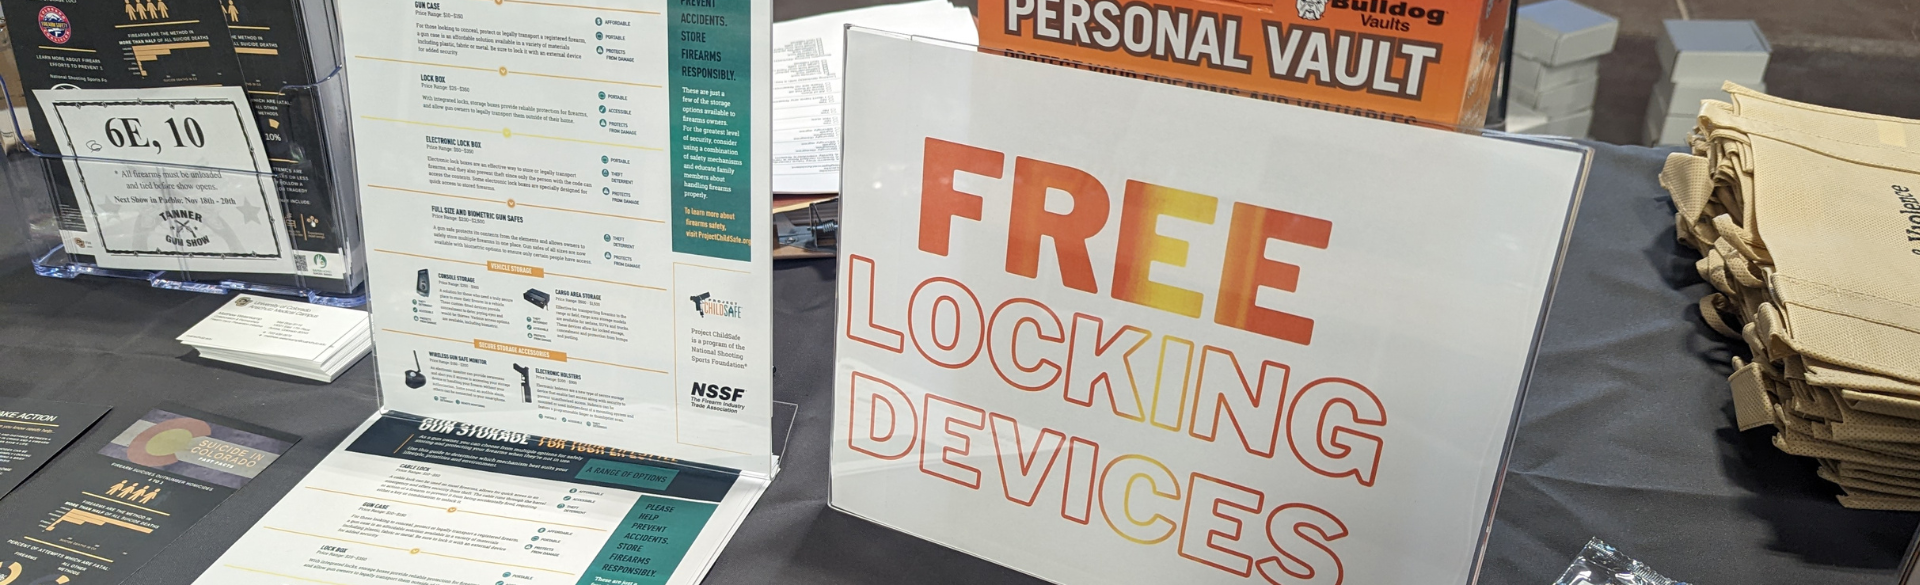 Sign on table at outreach event reading "Free locking devices"